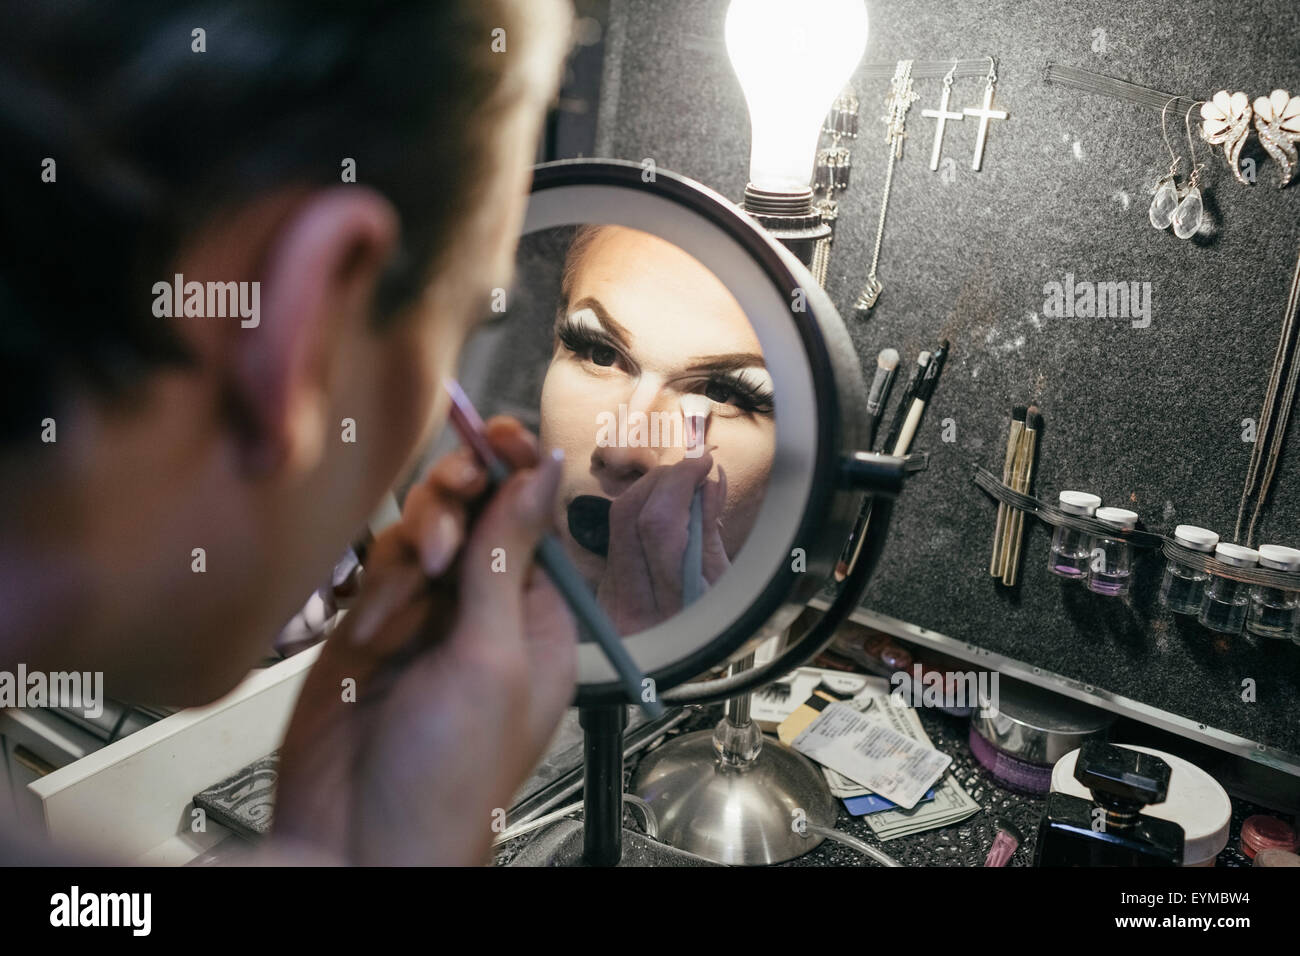 Male drag queen putting on make up and dressing up in preparation for a performance Stock Photo